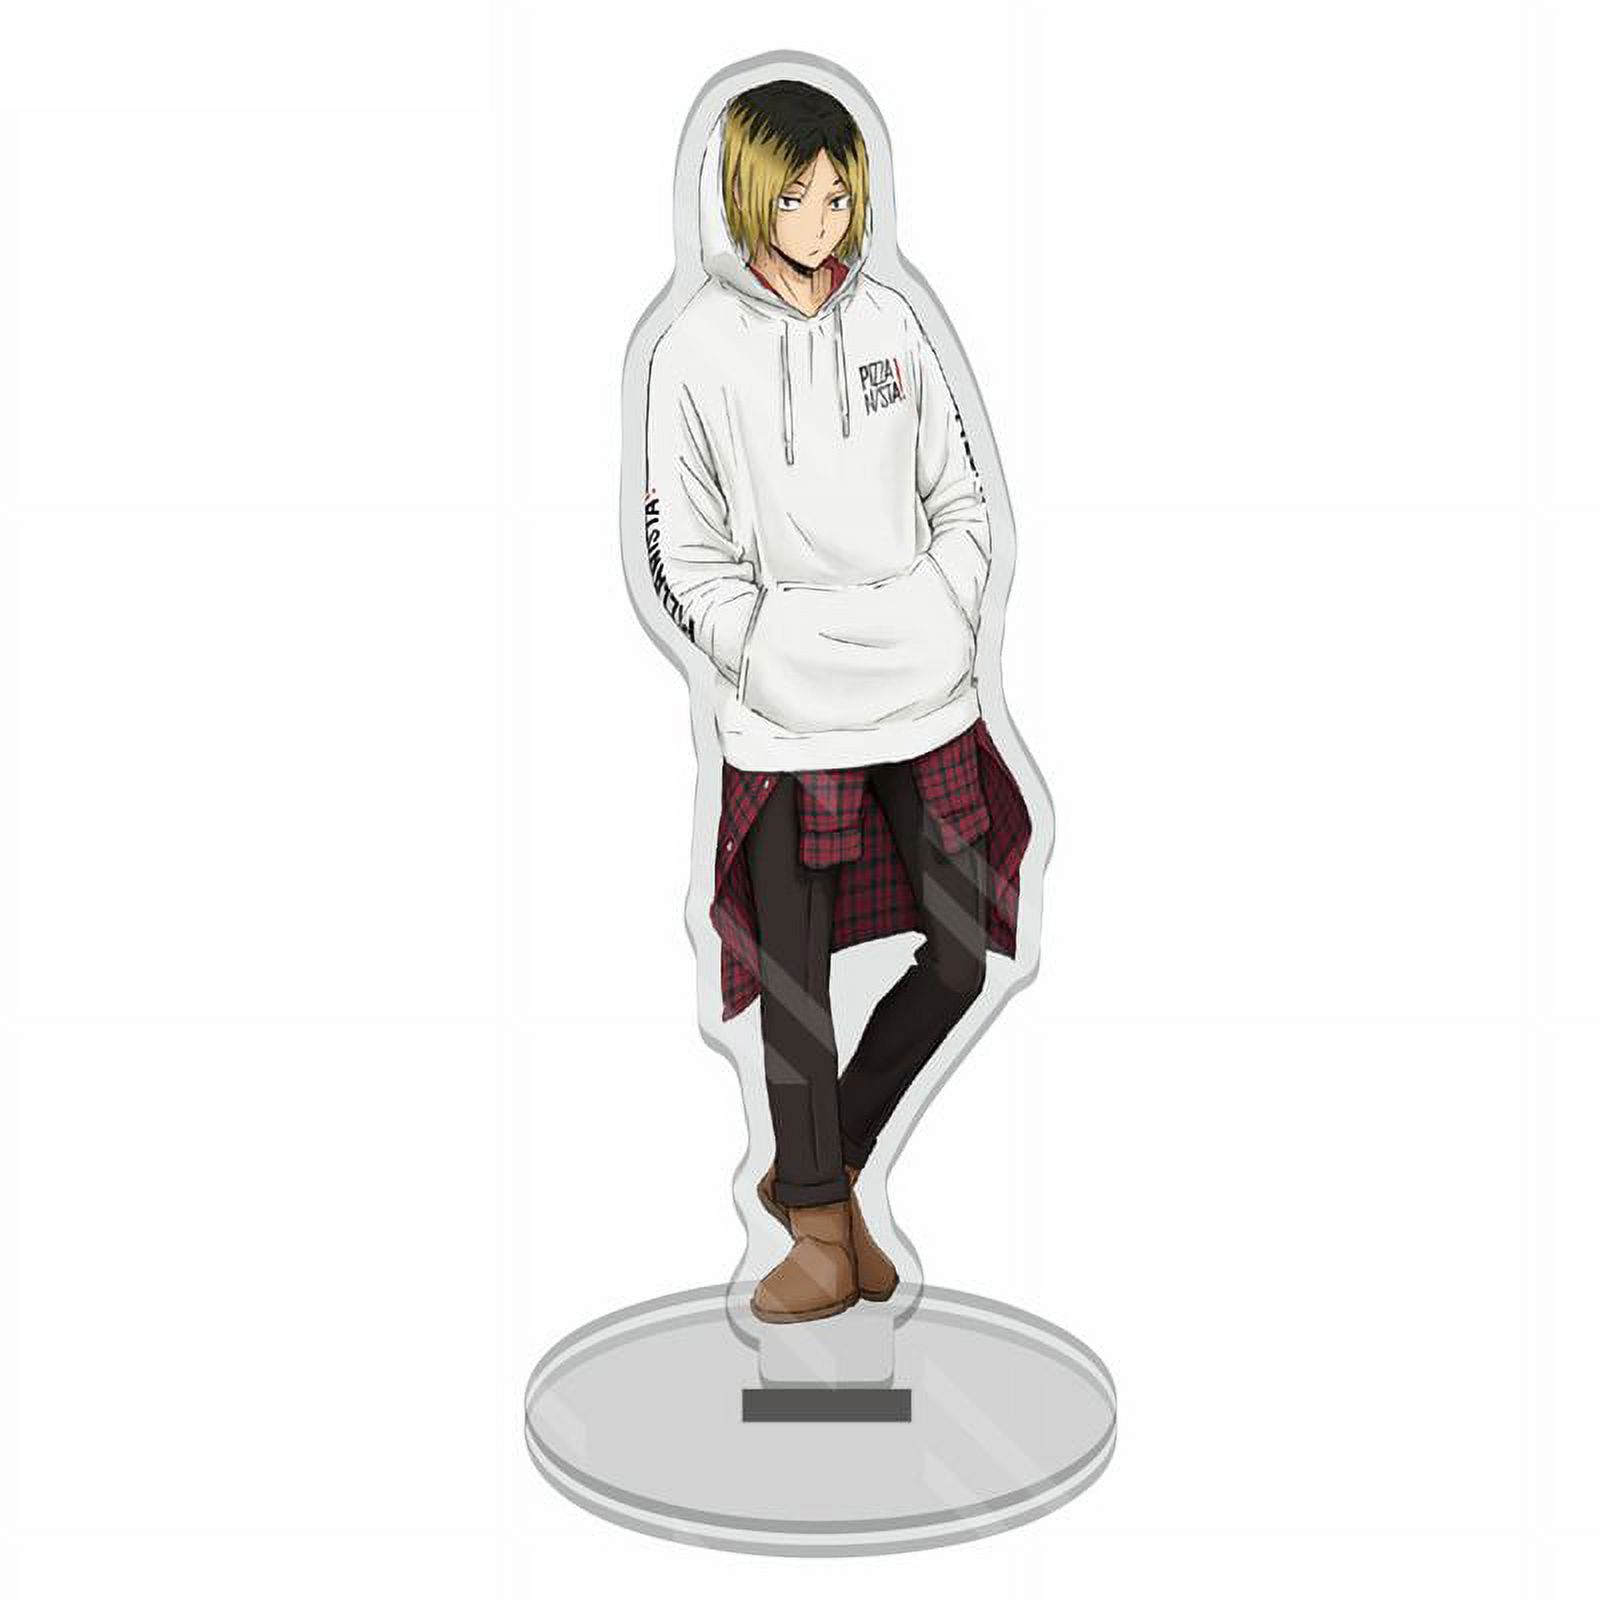 Yaoping 14 Styles Anime Haikyuu Figures Desk Plate Models Anime Acrylic Stand Model Toys Action Figures Decor Gift - image 1 of 9